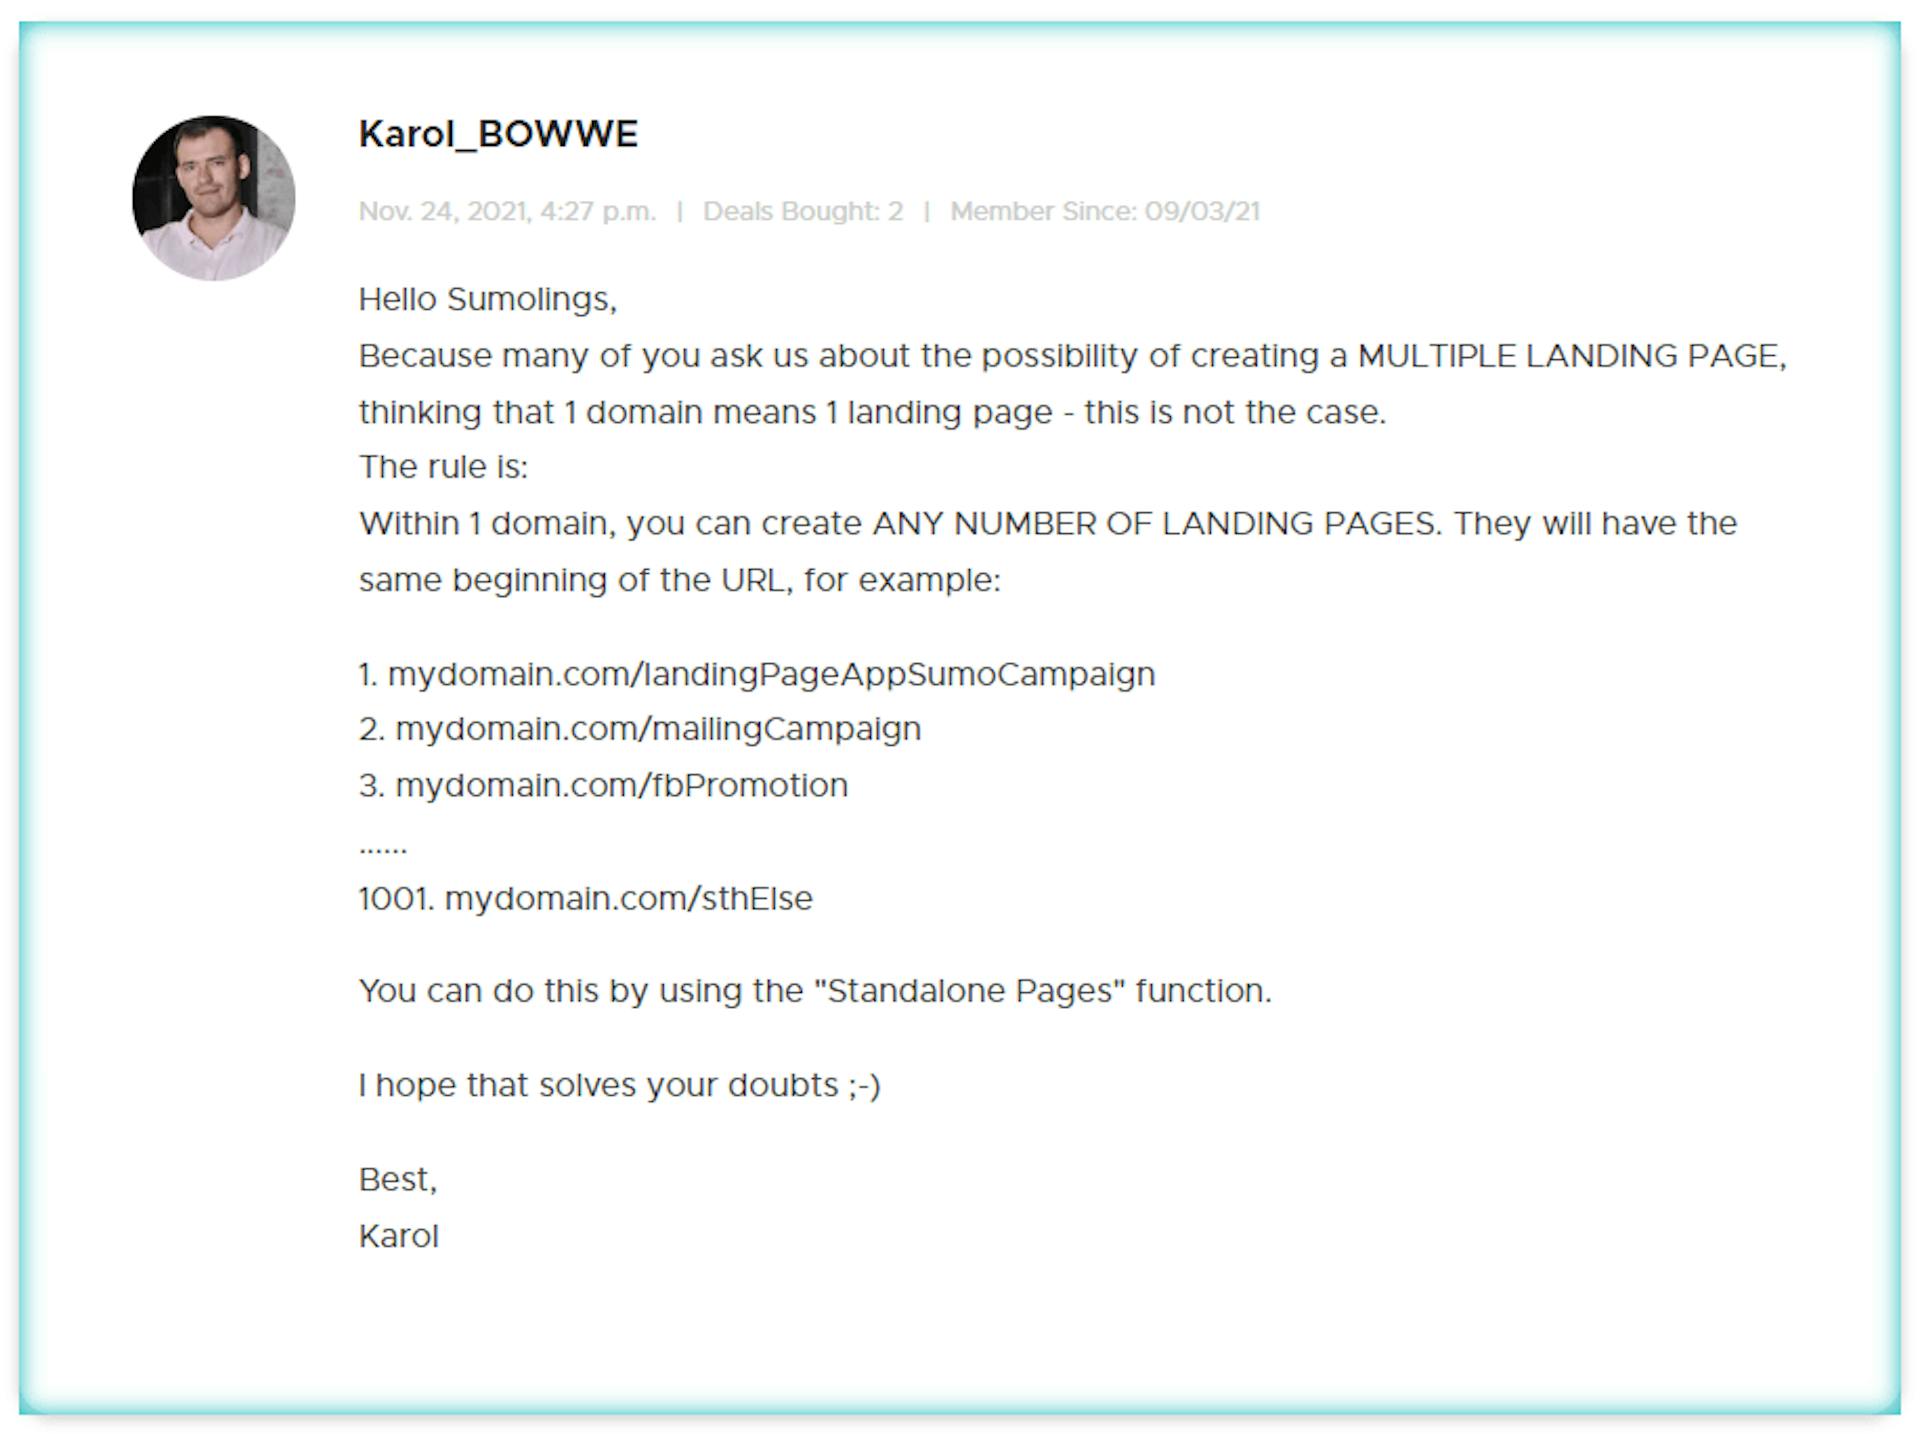 Karol’ message to Sumo-lings regarding the creation of an unlimited Landing page